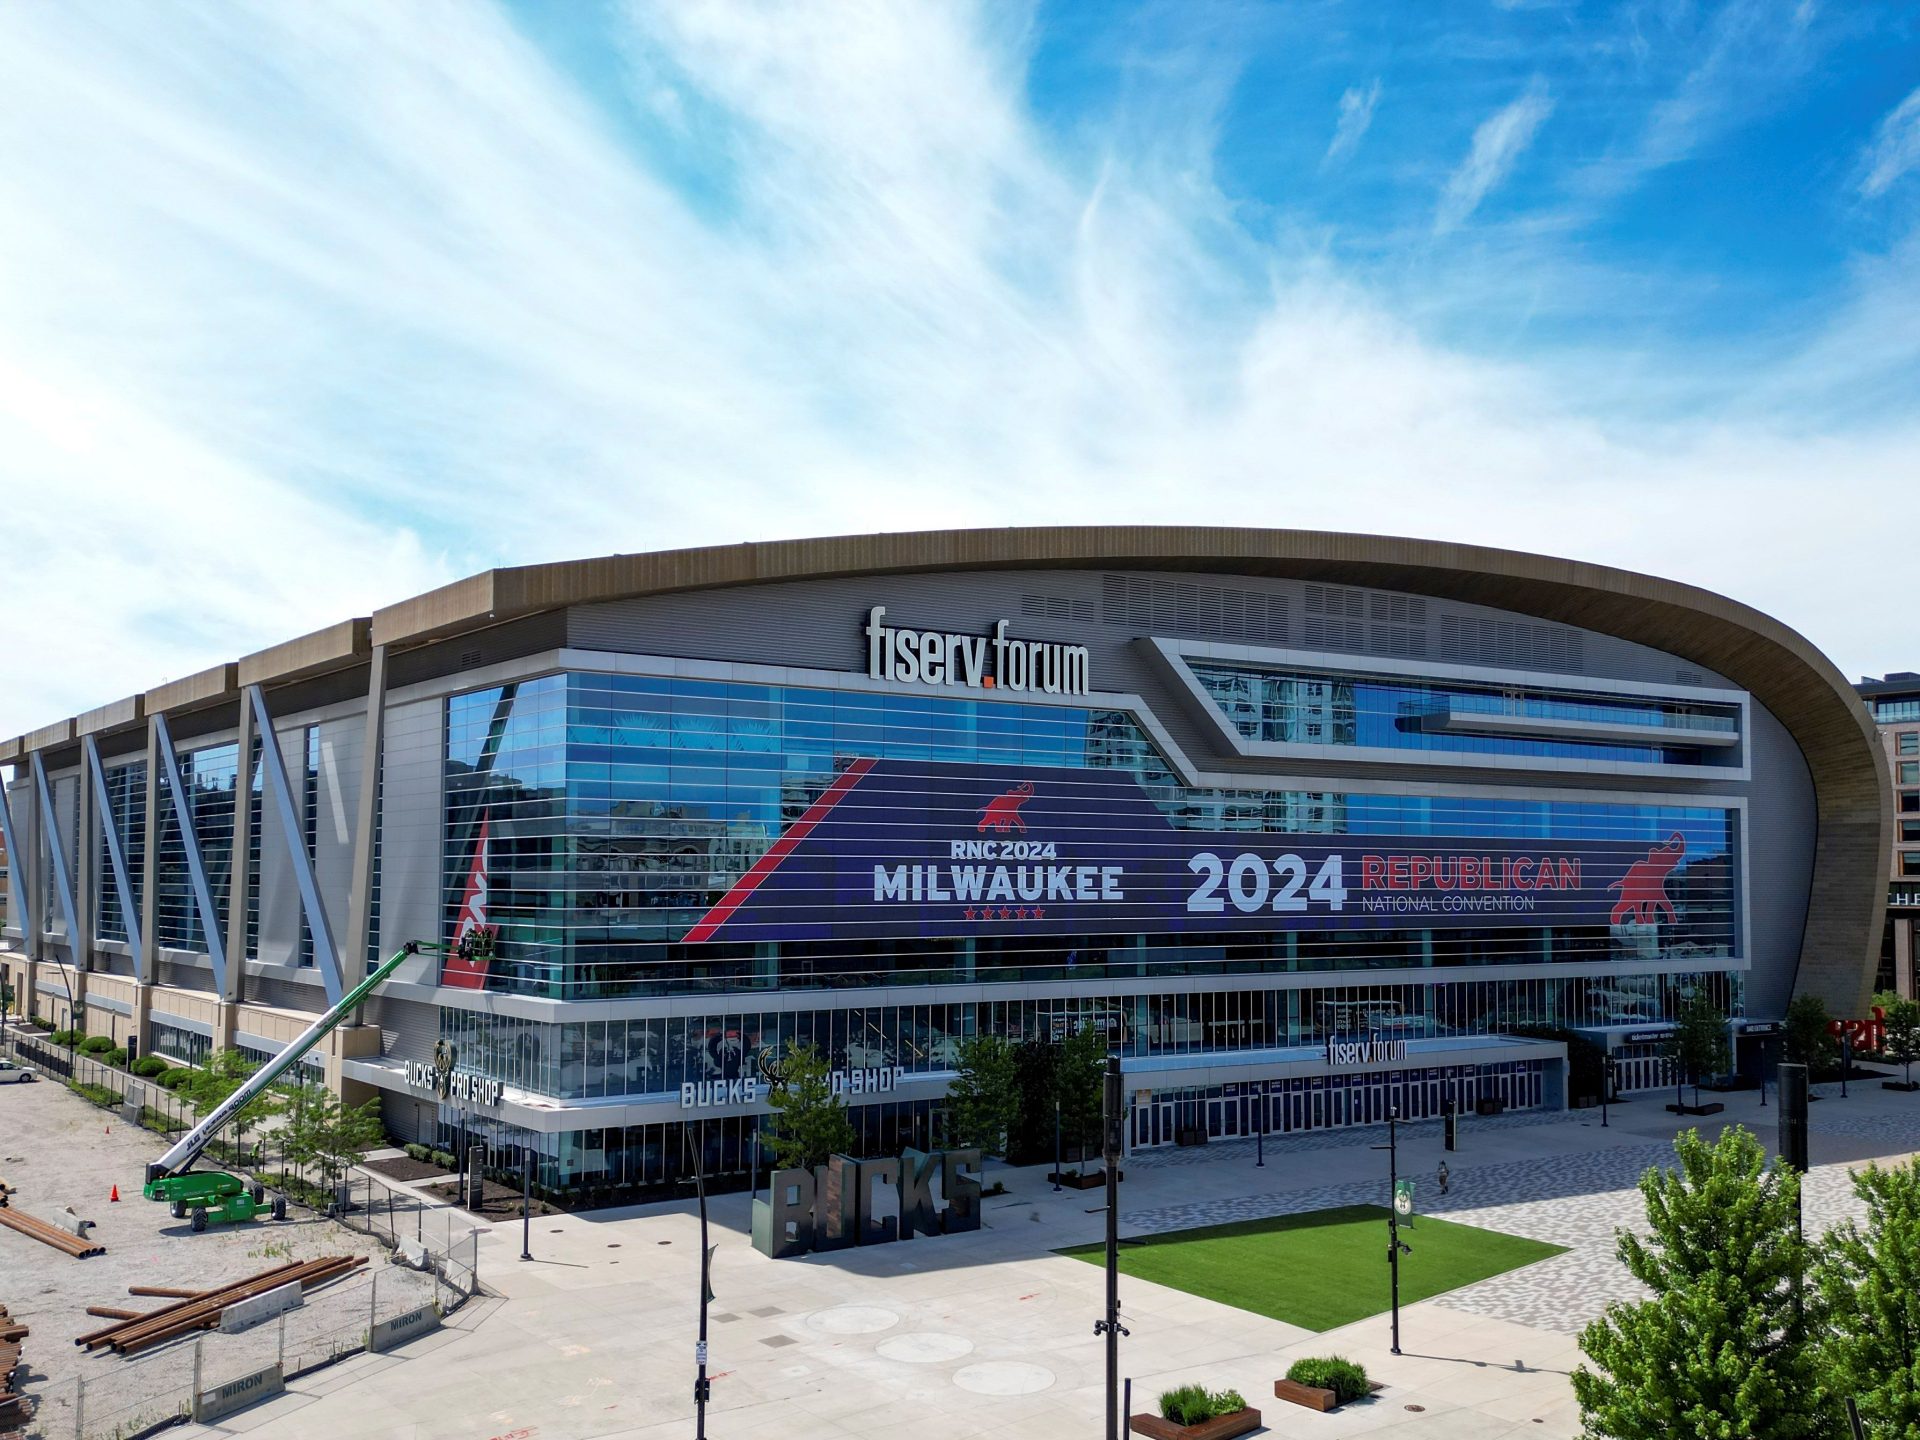 McAllen PD to assist Wisconsin with security at Republican National Convention